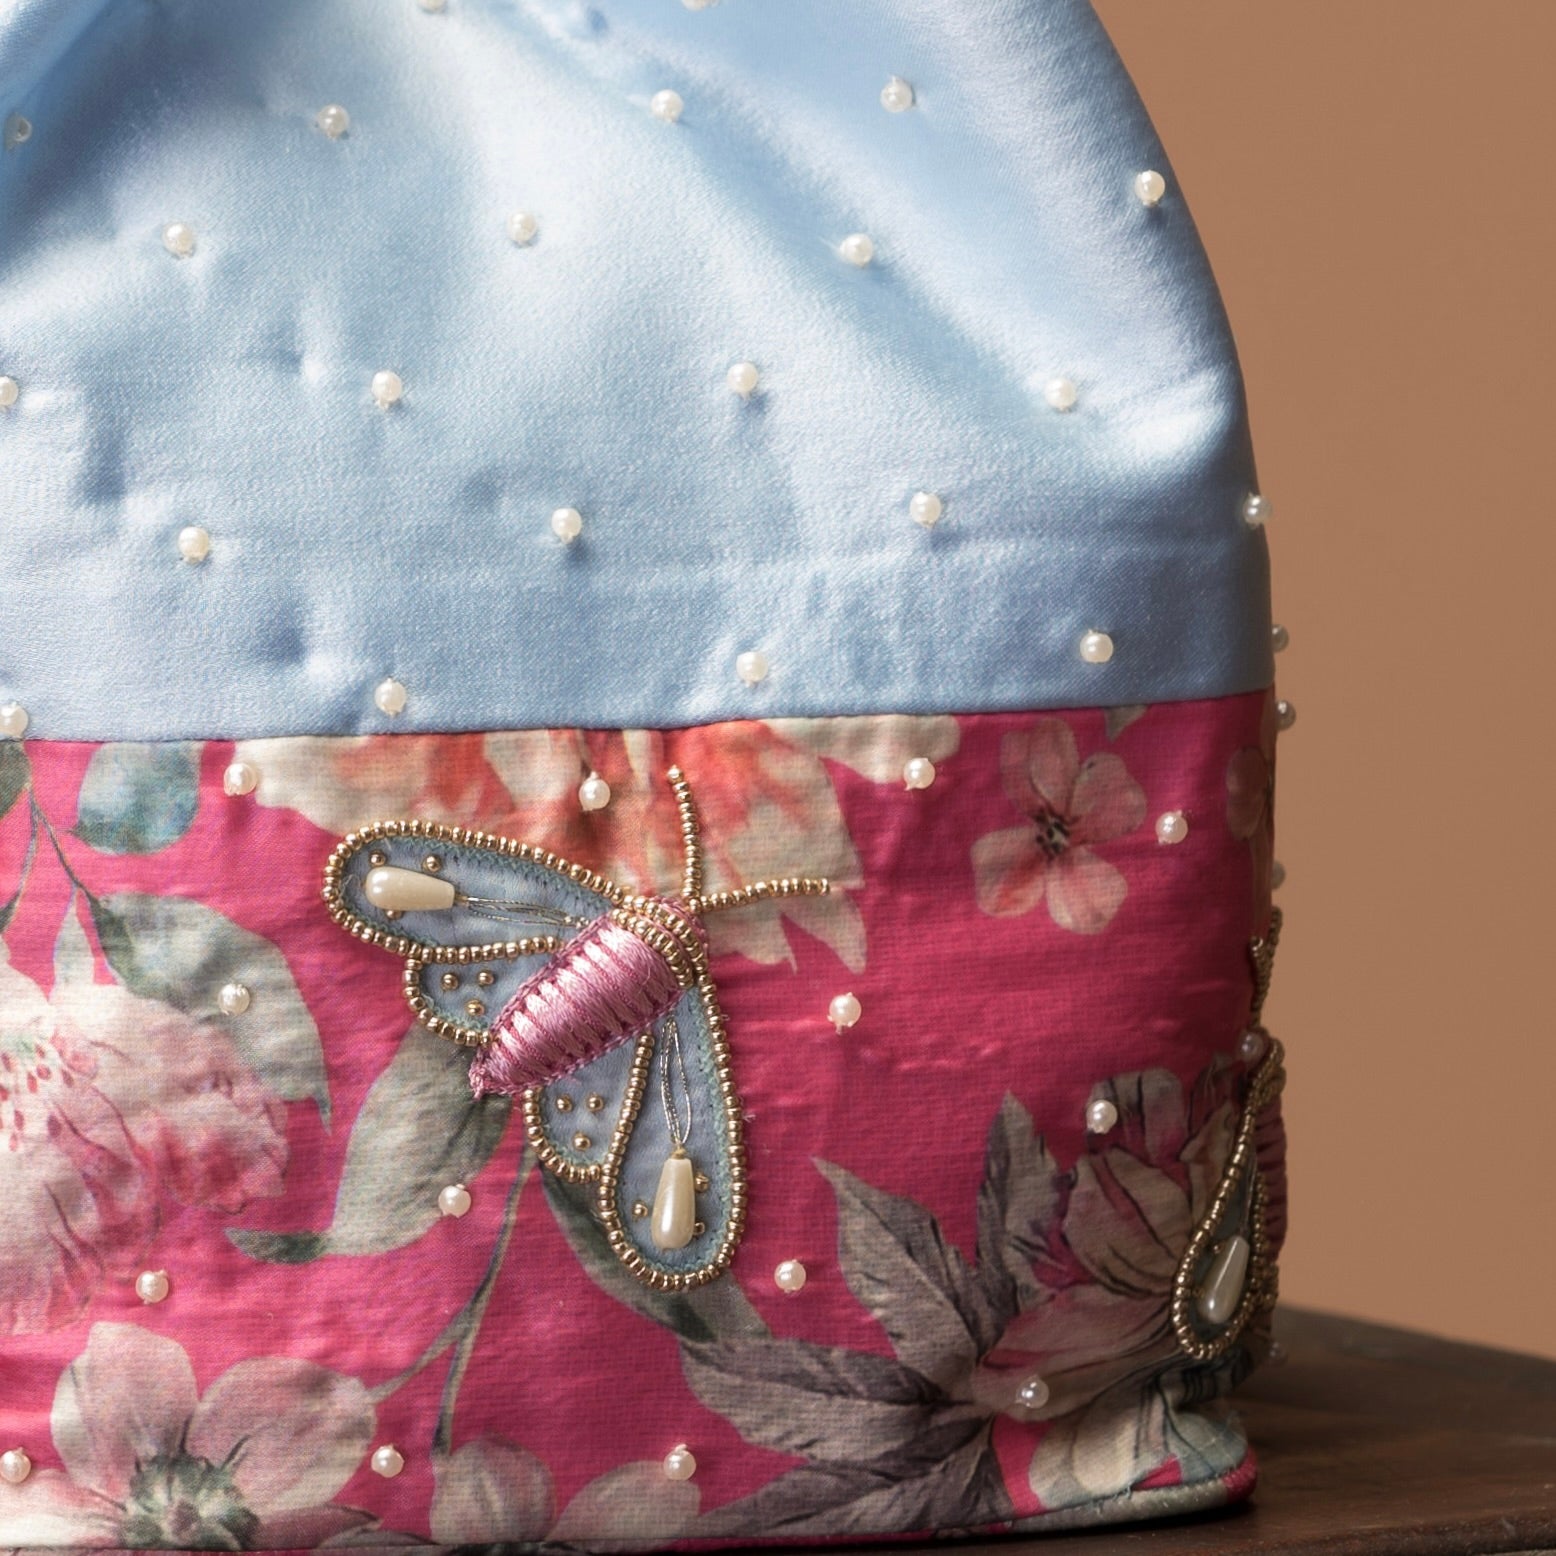 Floral embroidered hand bag - Pink and blue